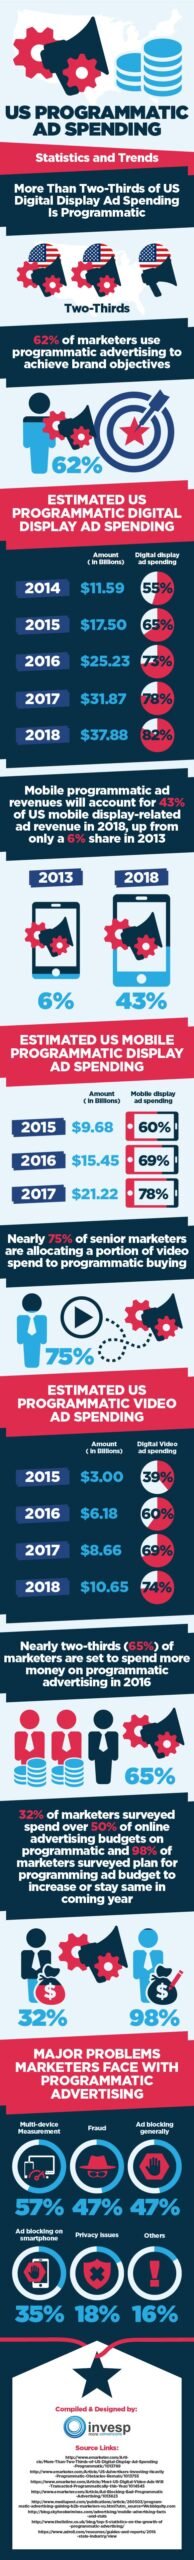 what-are-the-ways-that-programmatic-ads’-targeting-abilities-have-reshaped-marketing?-–-adgully.com